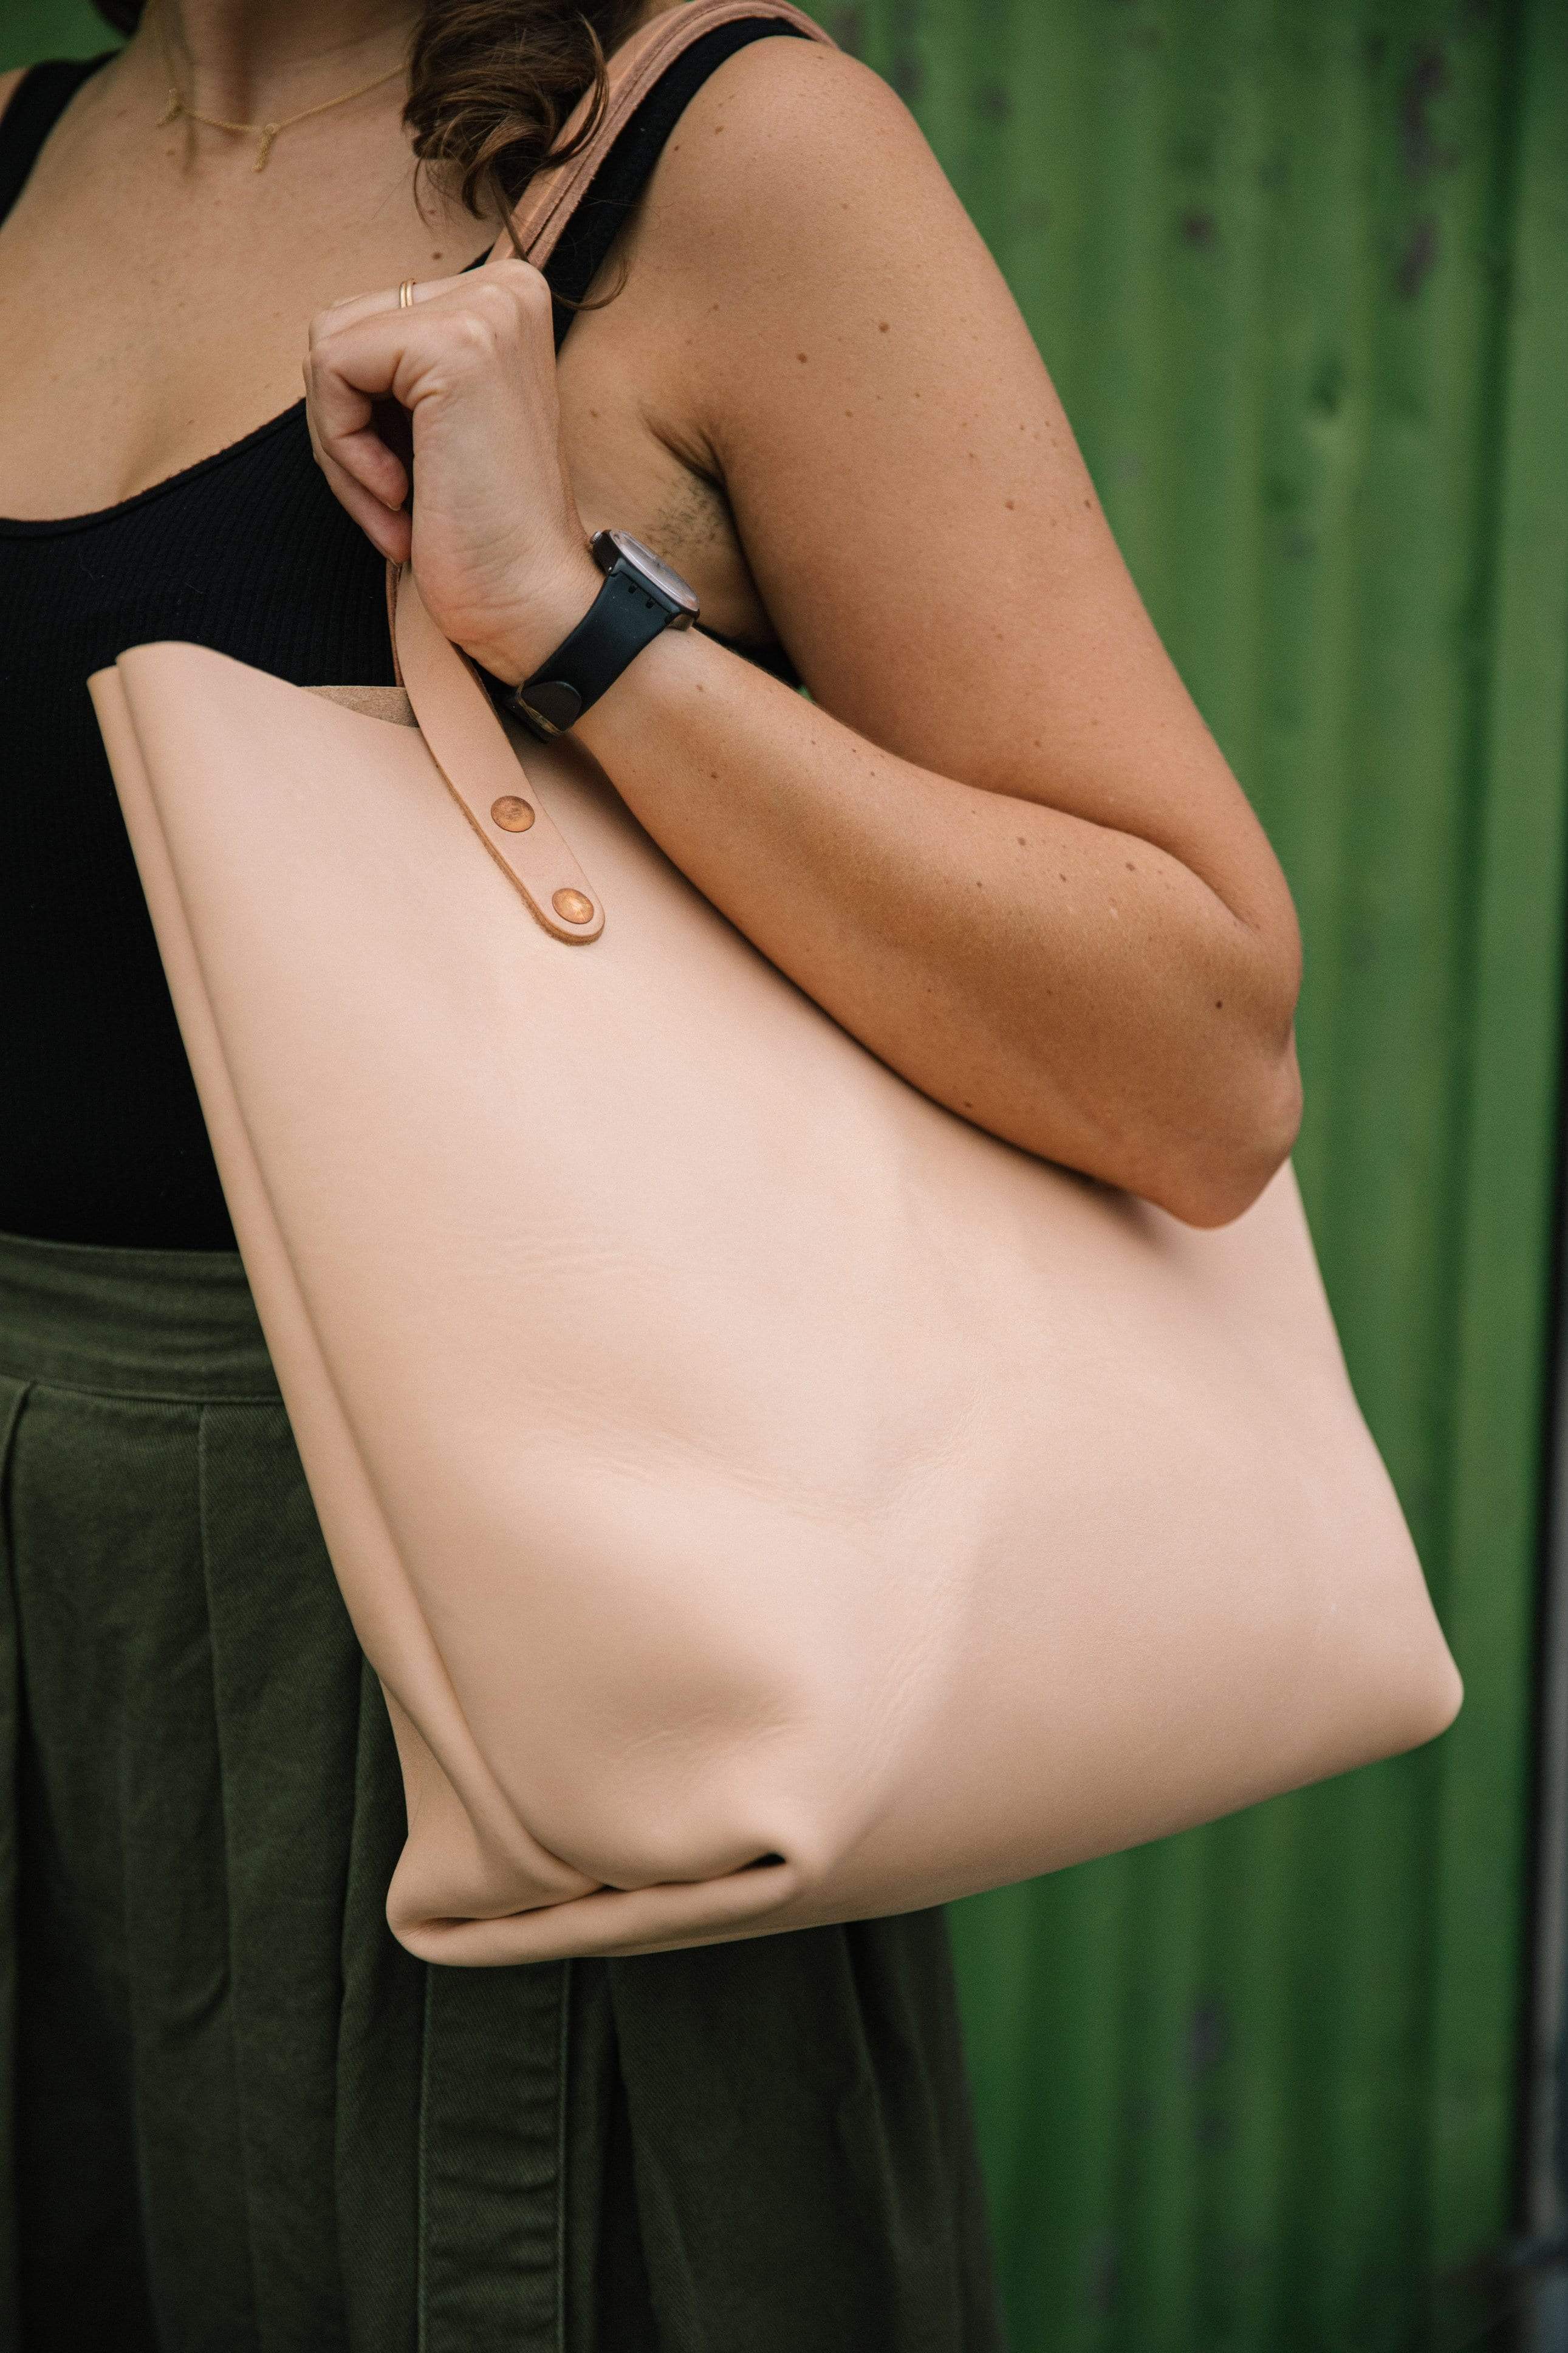 Vegetable Tanned Leather Clutch | Leather Clutch Bag by KMM & Co. Yes